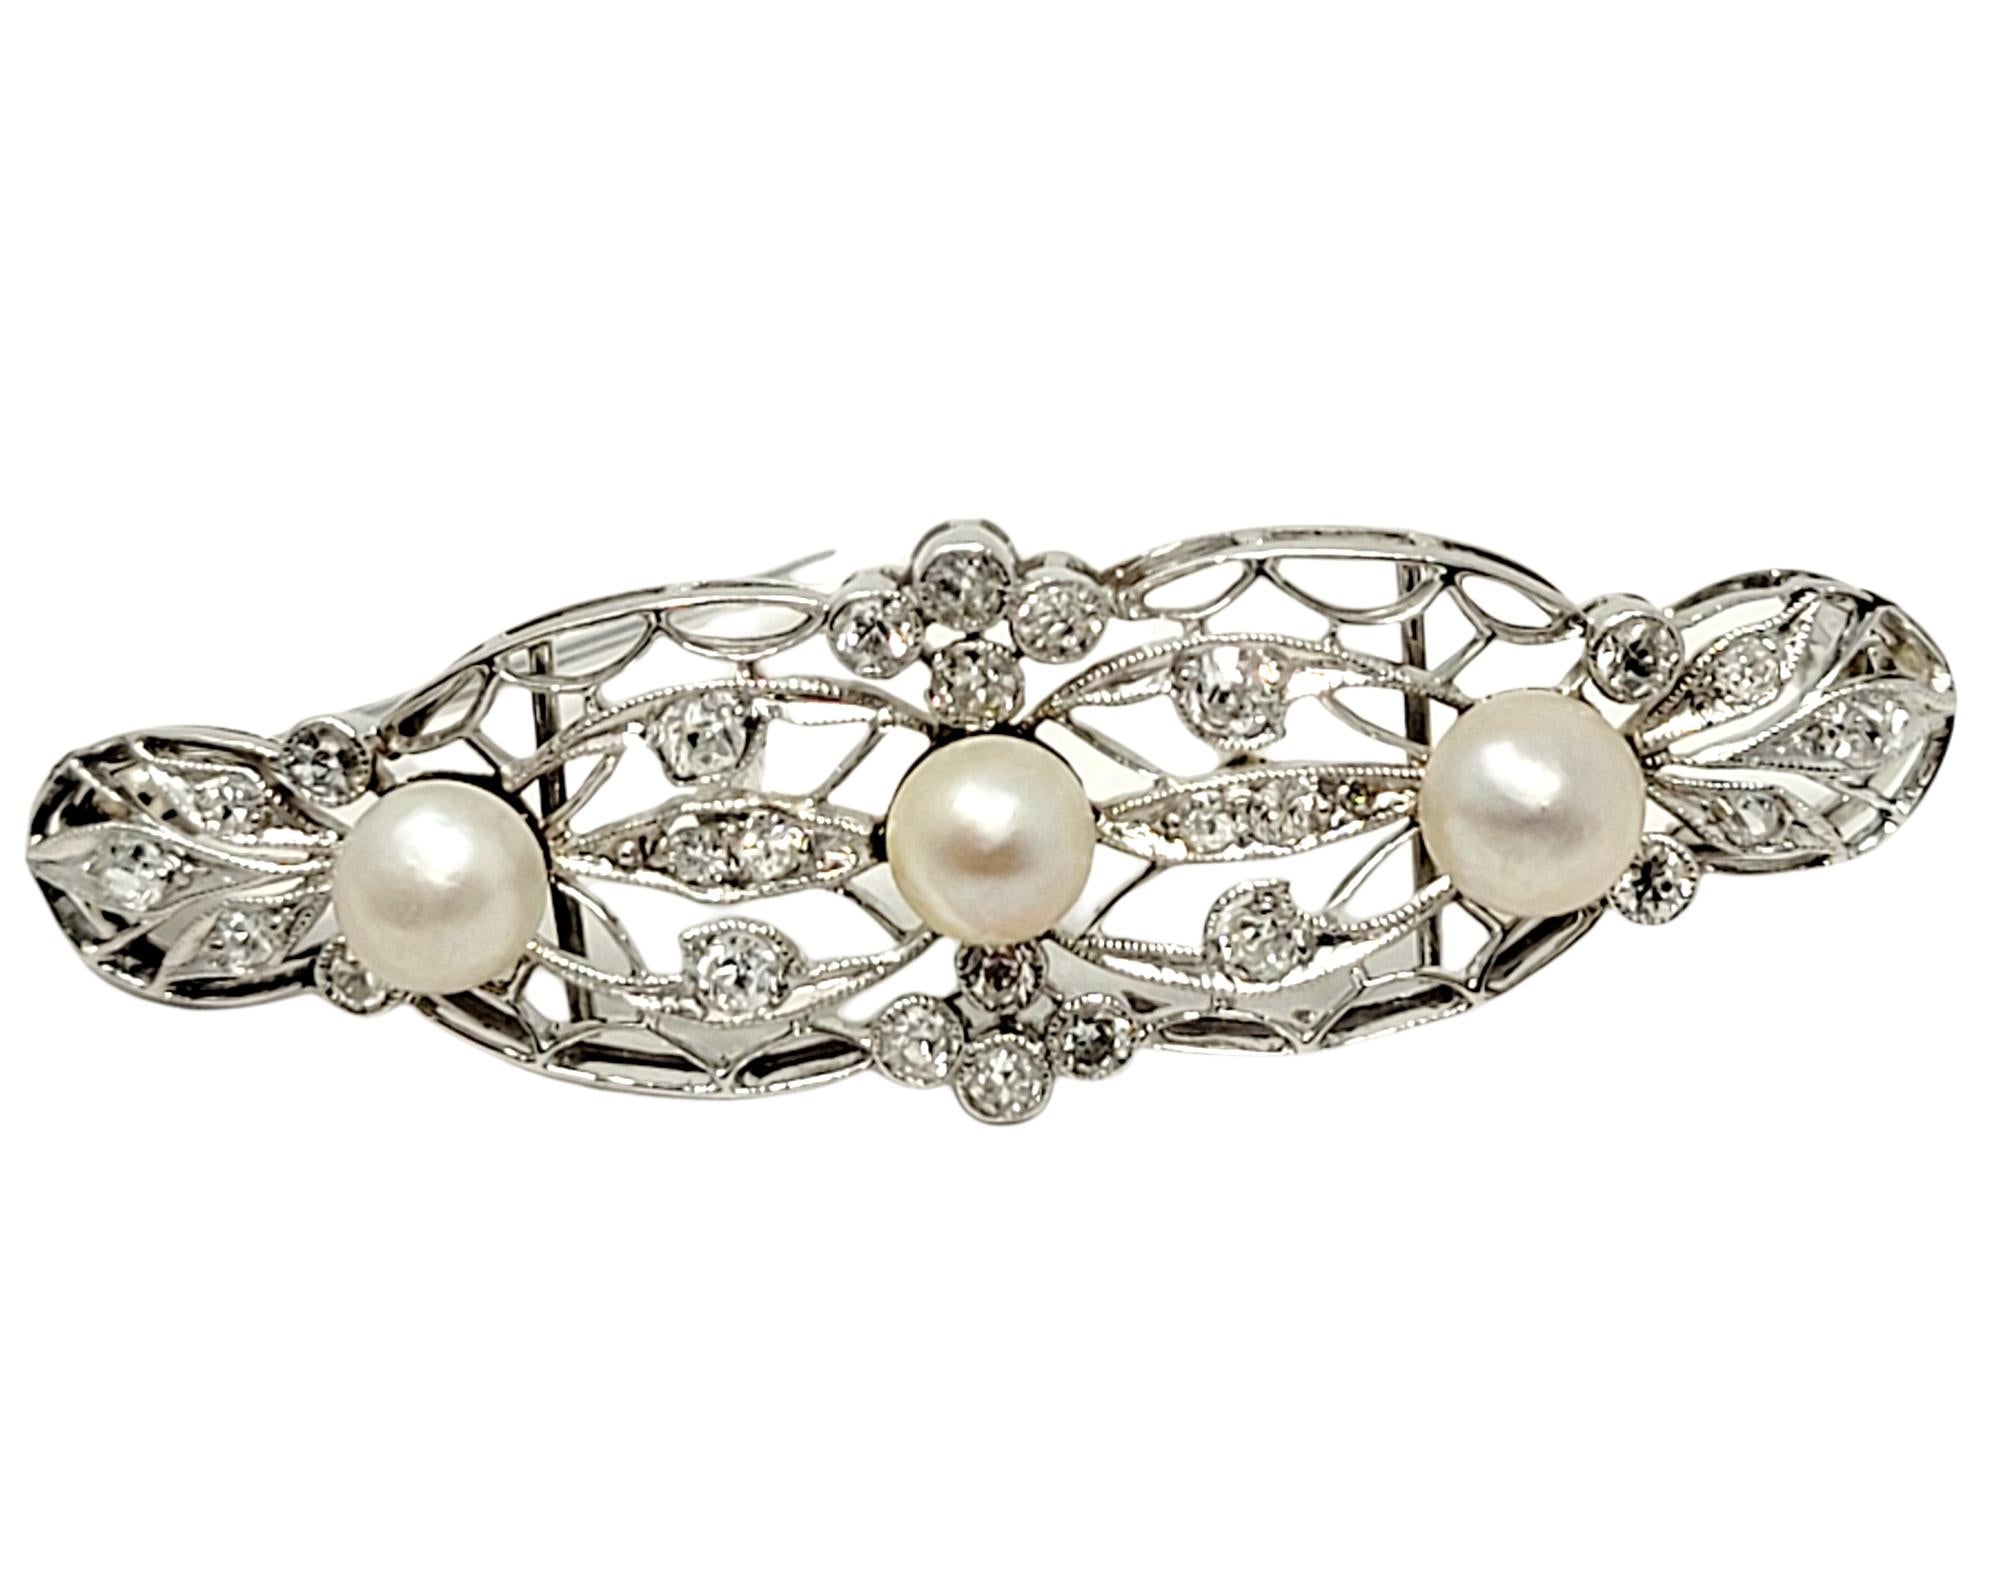 Exquisite vintage Edwardian style filigree brooch with delicate diamond and pearl accents. 

Metal: 14K White Gold
Closure: Hinged stick pin
Cultured Pearls: 3
Natural Diamonds: .50 ctw 
Diamond Cut: Old European
Diamond Color: E-F
Diamond Clarity: